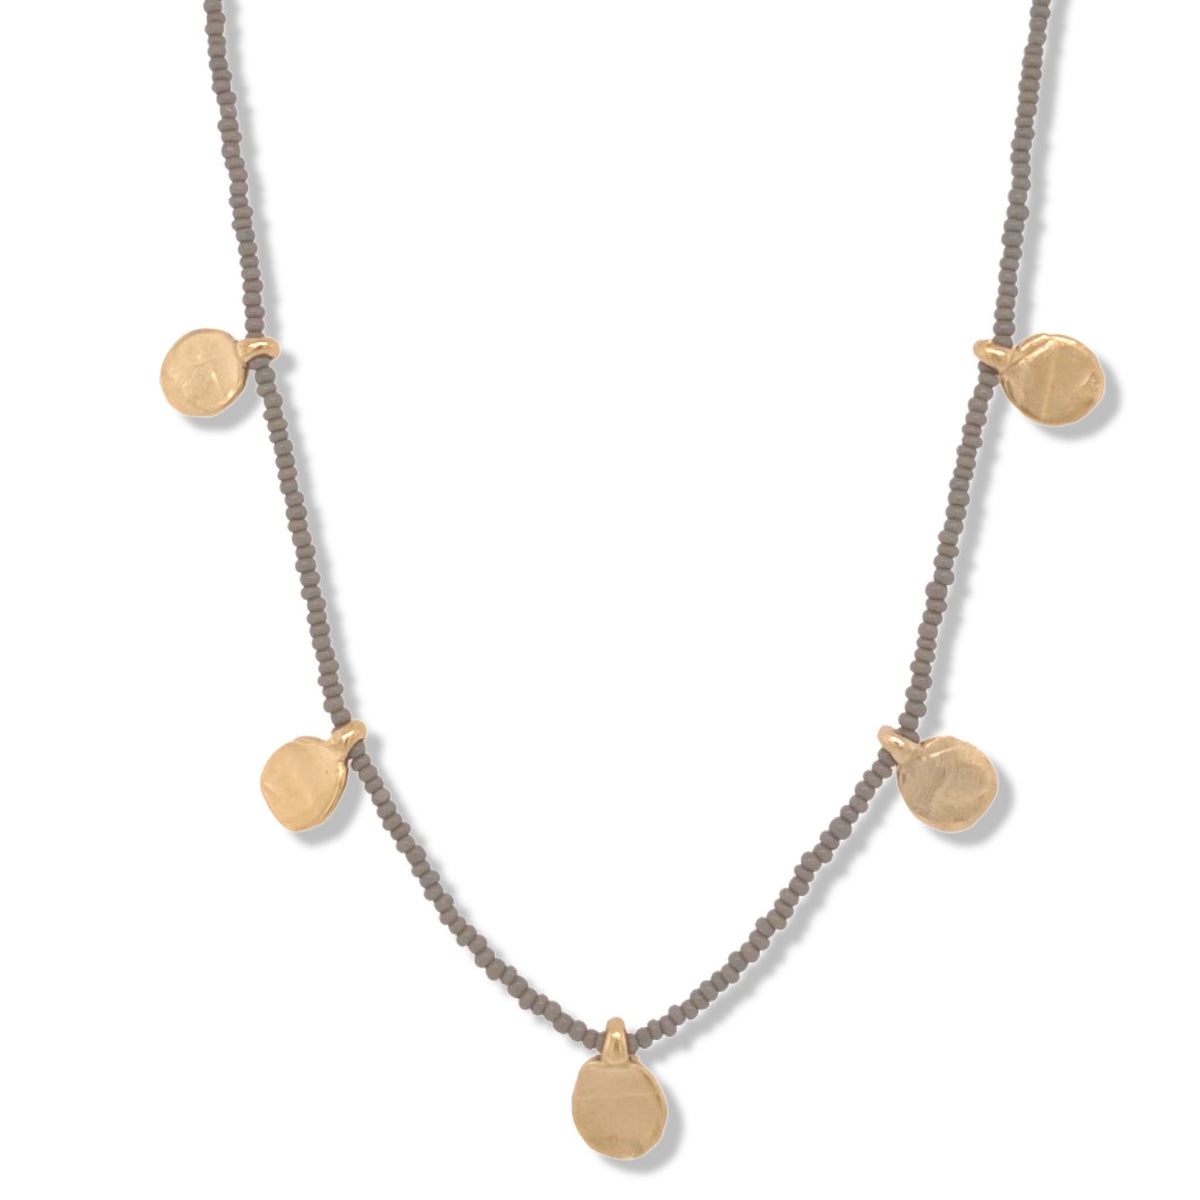 Dot Necklace in Gold on Micro Charcoal Beads | Keely Smith Jewelry | Nantucket